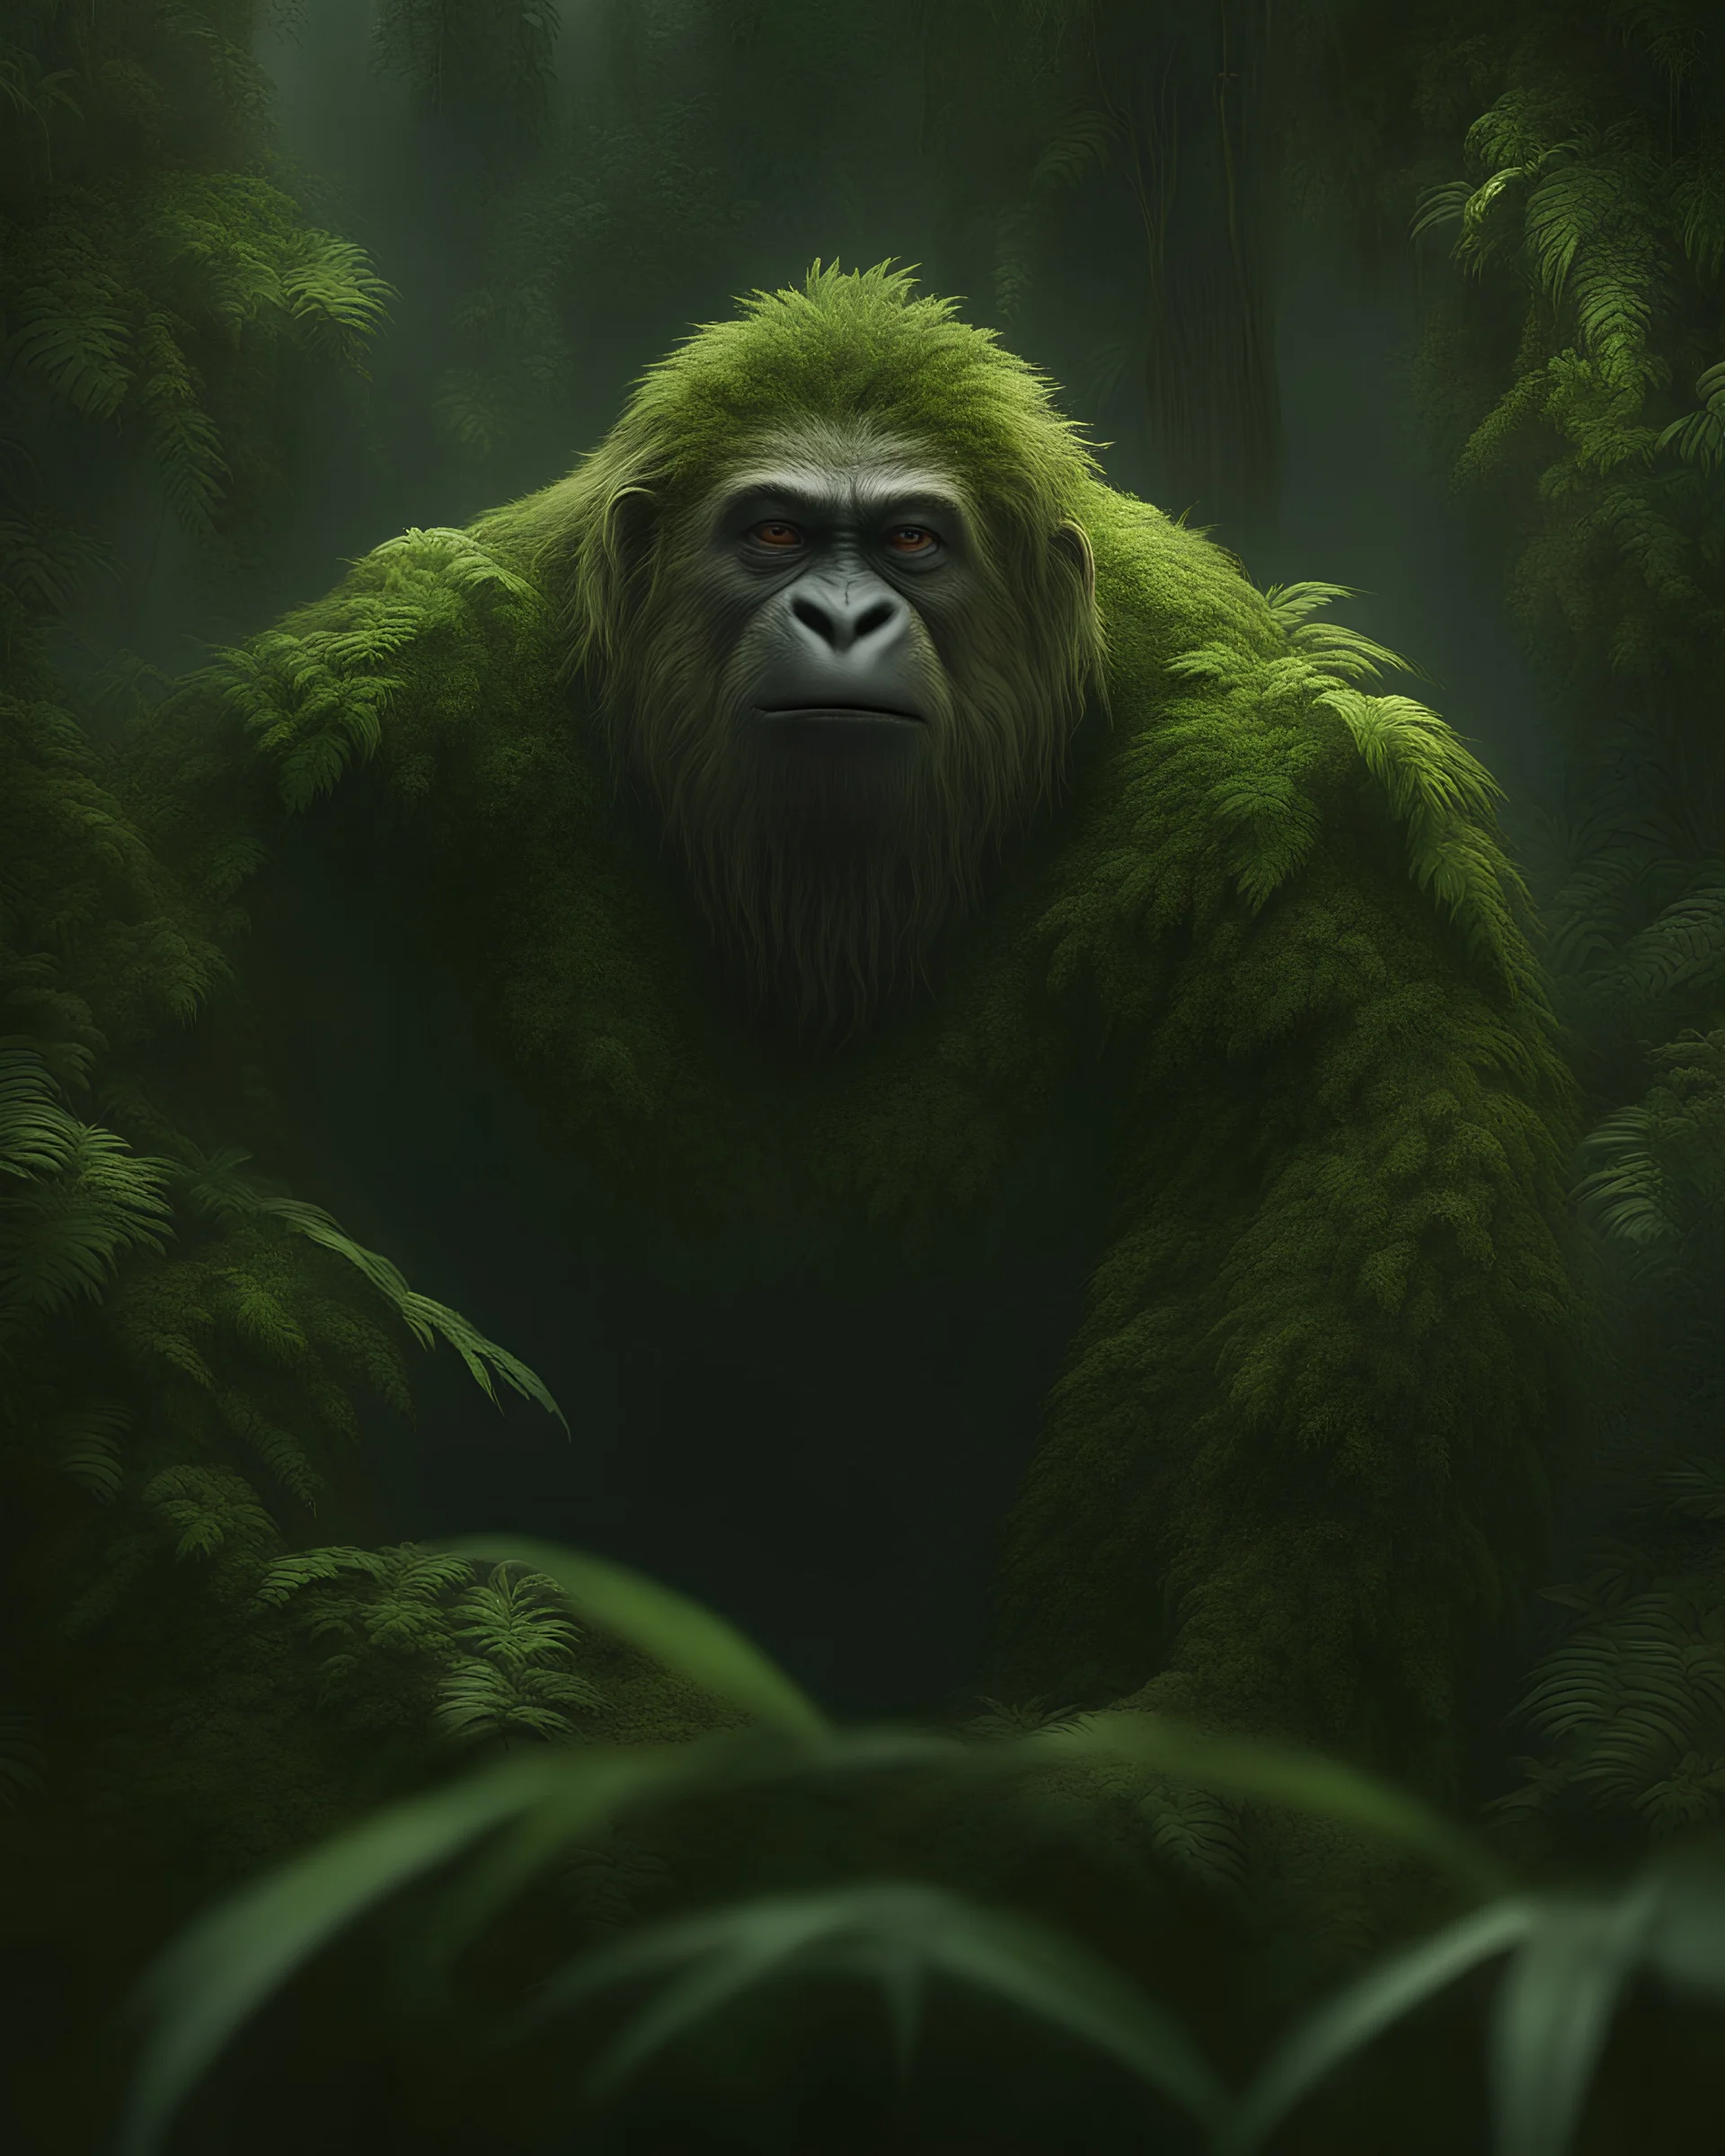 Craft a breathtaking 4K image of the legendary Yeti in the rainforest, showcasing hyper-realistic details. Capture the elusive creature amidst lush greenery, with every raindrop and strand of its shaggy fur meticulously depicted. Create a sense of awe and mystery as the Yeti's piercing gaze meets the viewer, immersed in the vibrant ecosystem of the rainforest. Include ferns, hanging vines, and dappled sunlight filtering through the dense foliage. Let your art transport viewers into a world where